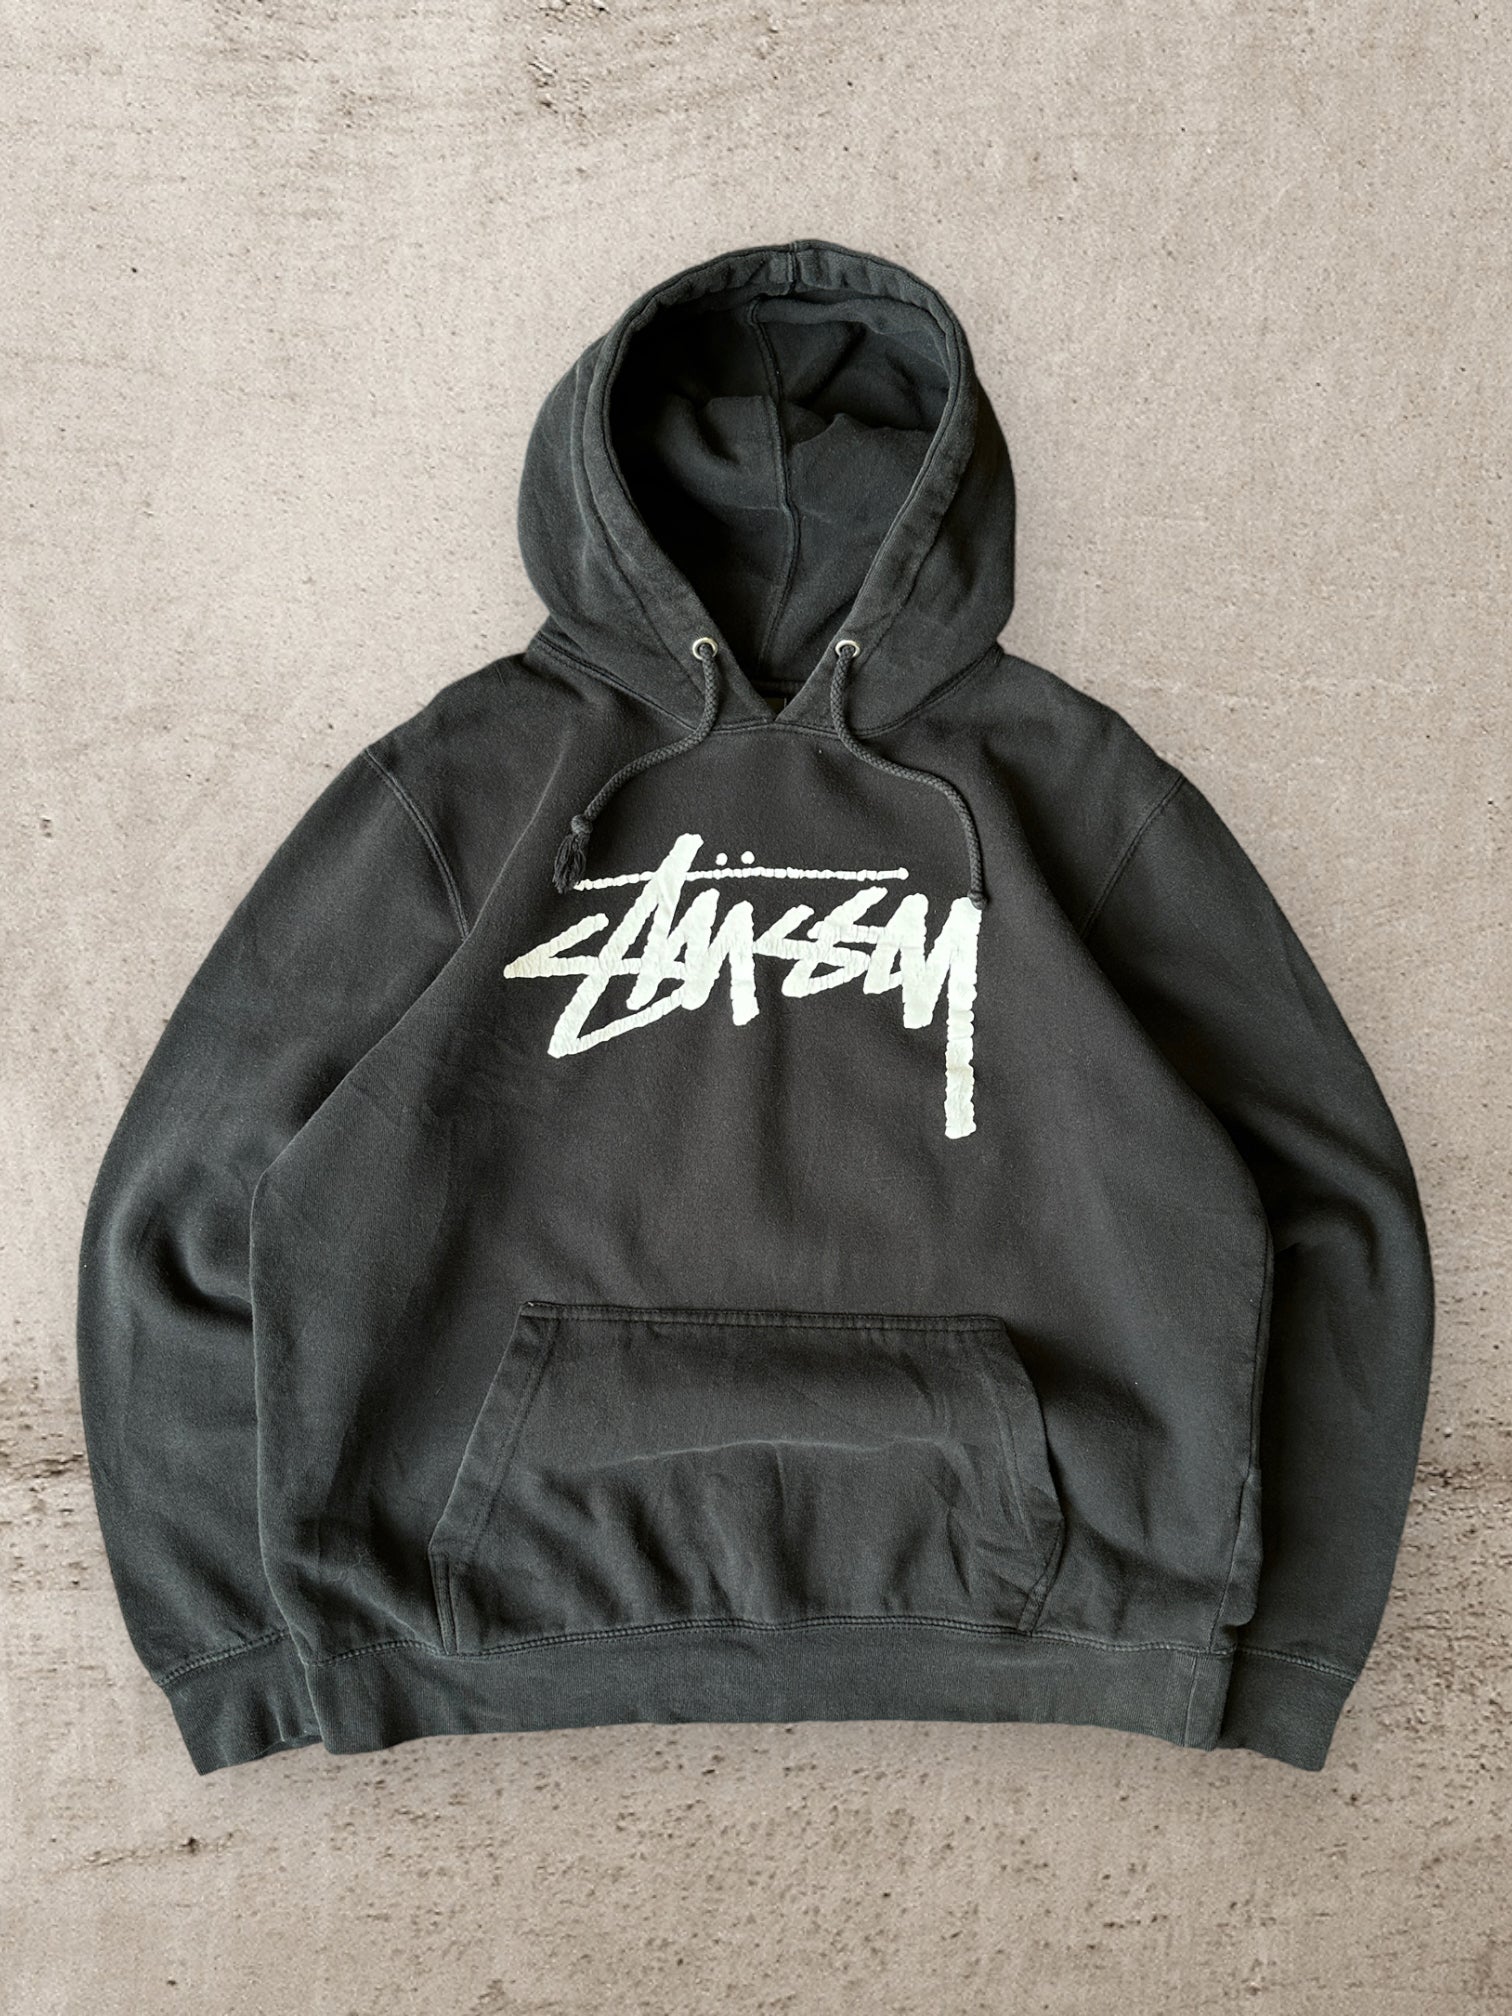 00s Stussy Spell Out Hoodie - Large